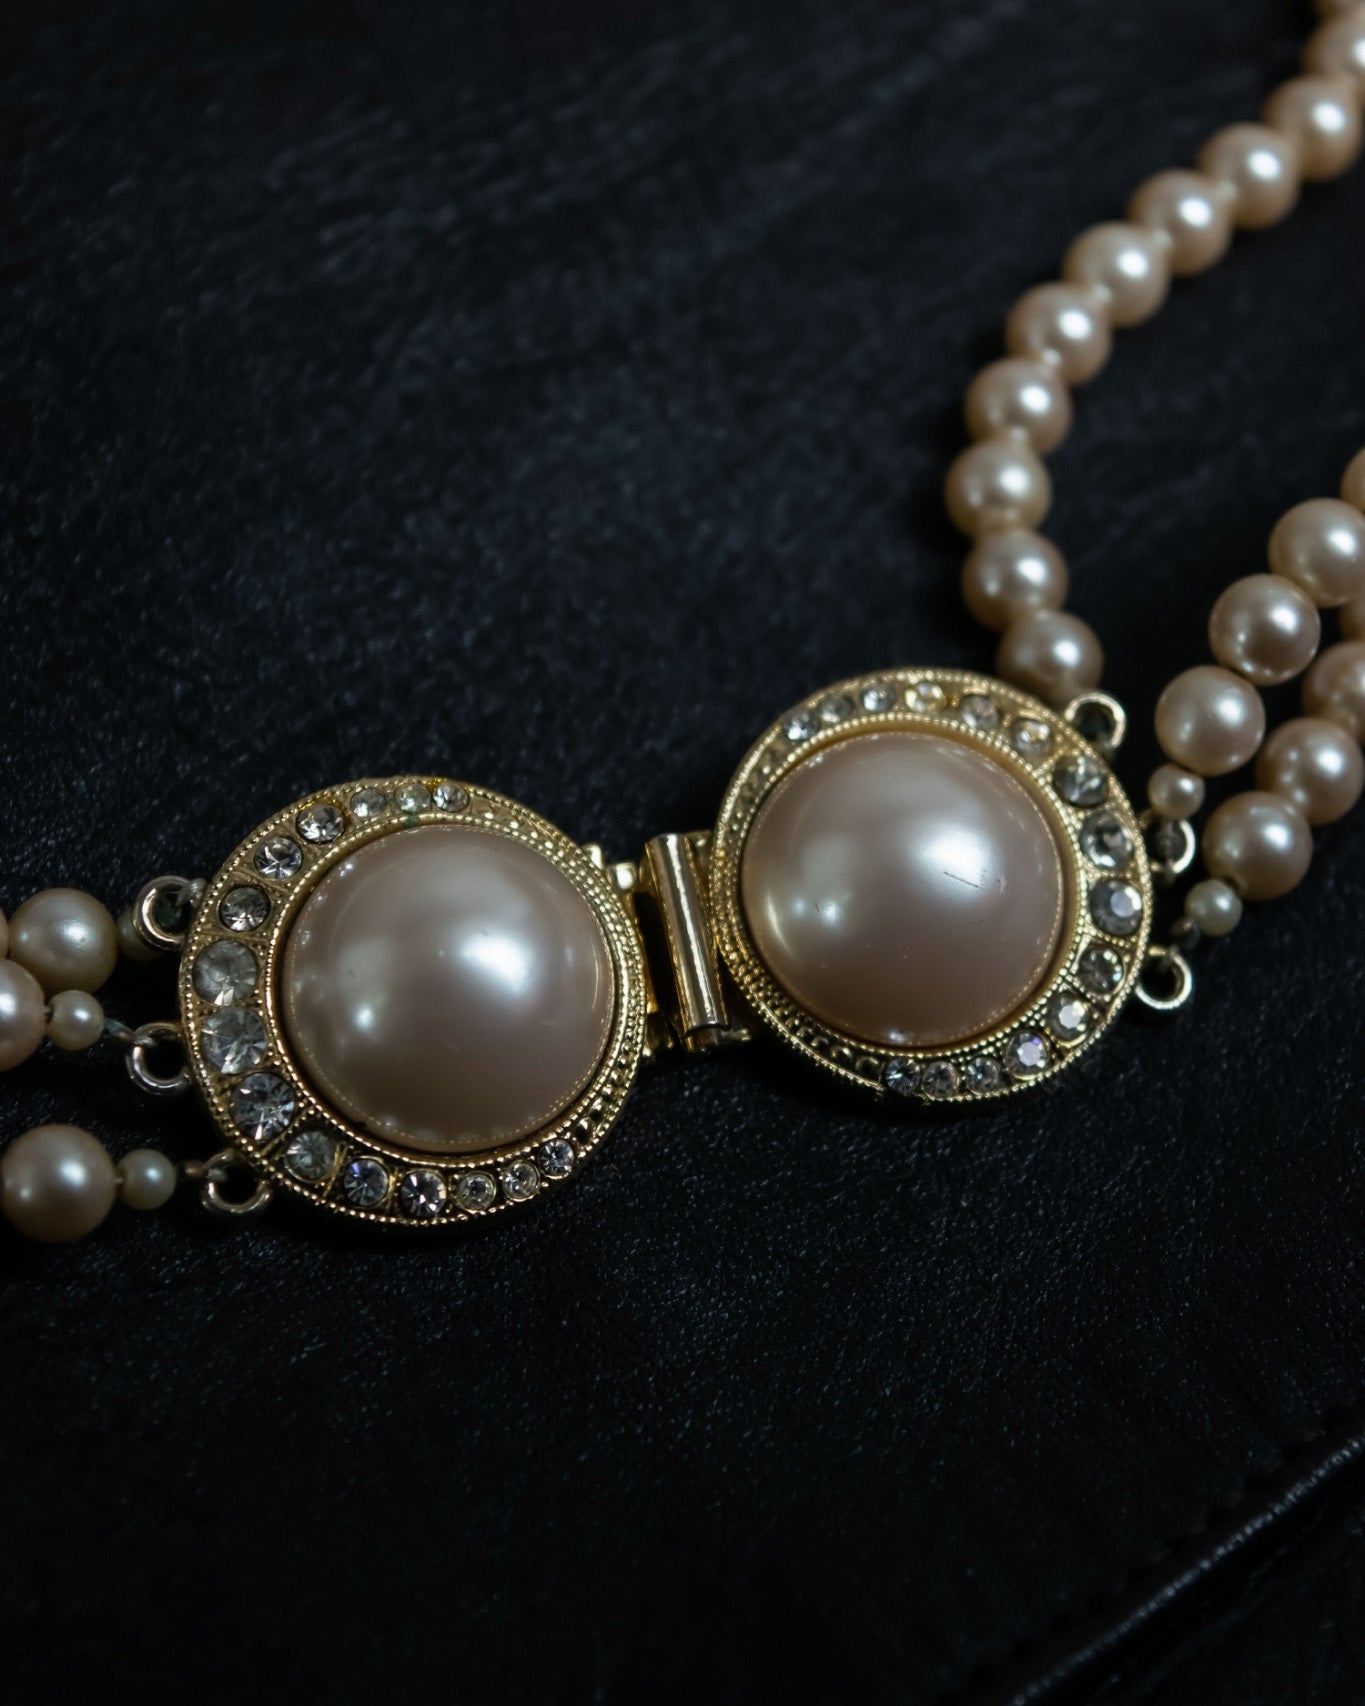 Two ＪLarge Pearls and a Crescent Moon Necklace